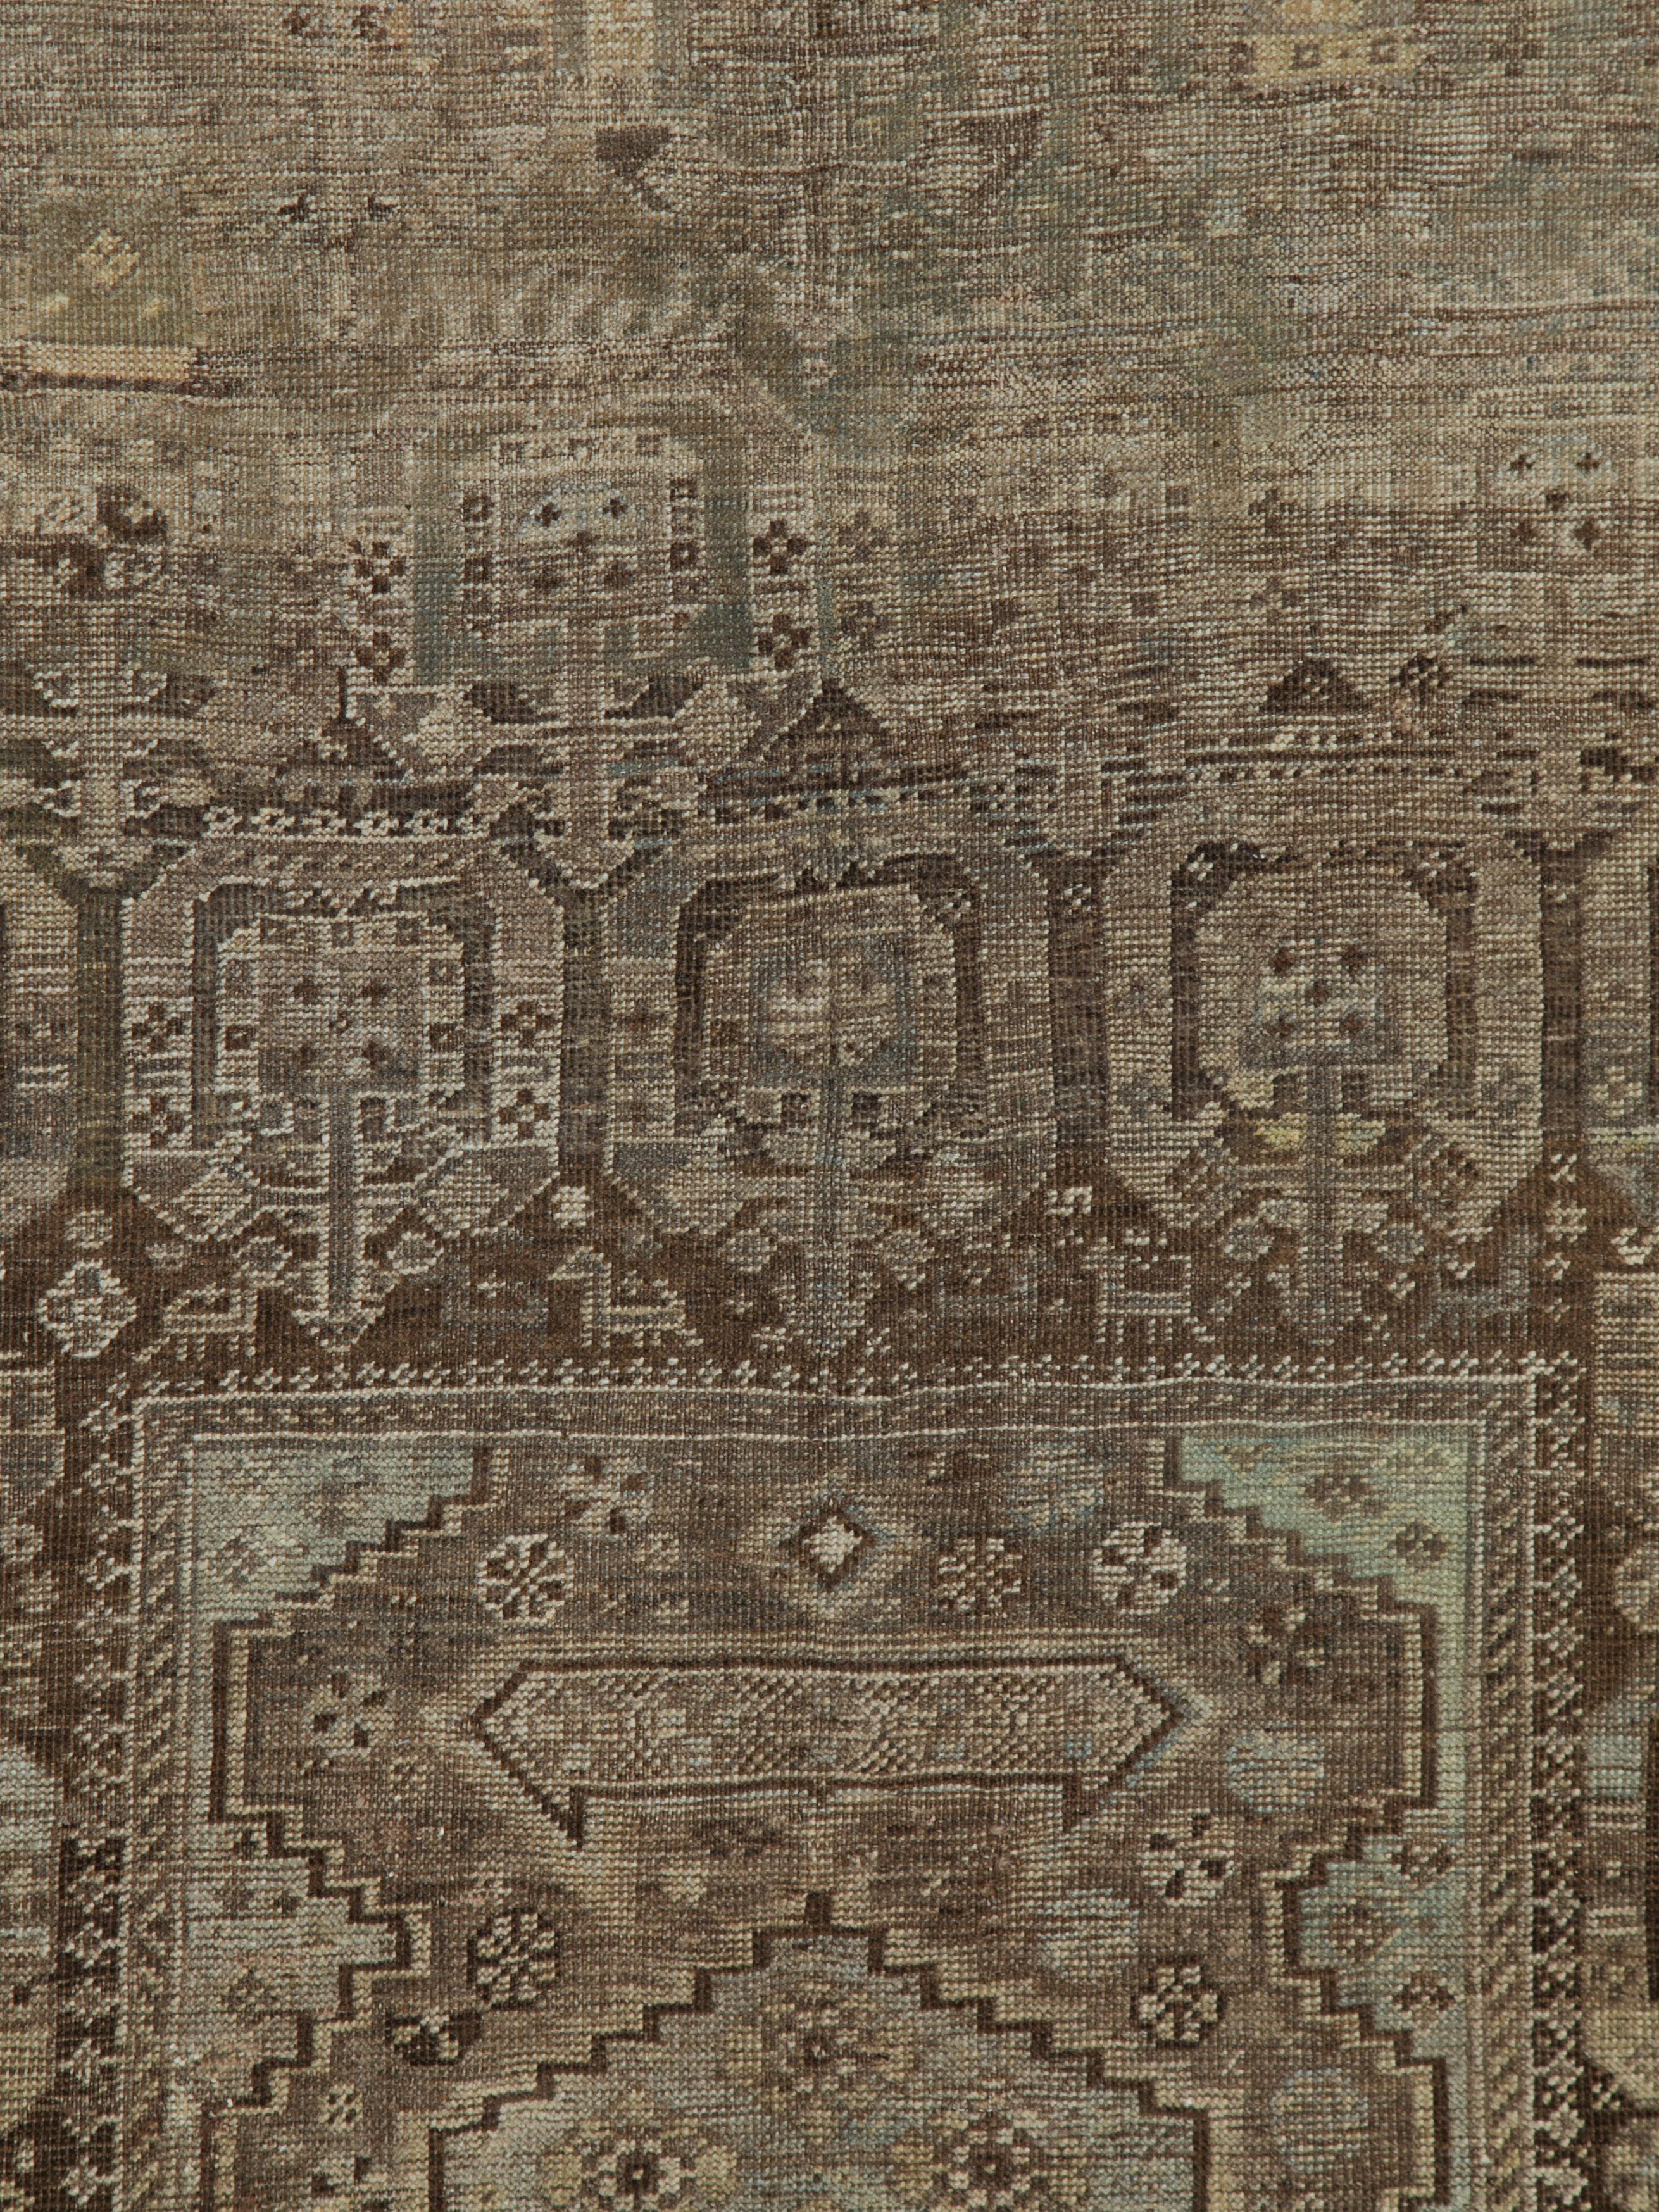 An antique Persian Shiraz rug from the early 20th century.

Measures: 5' 10